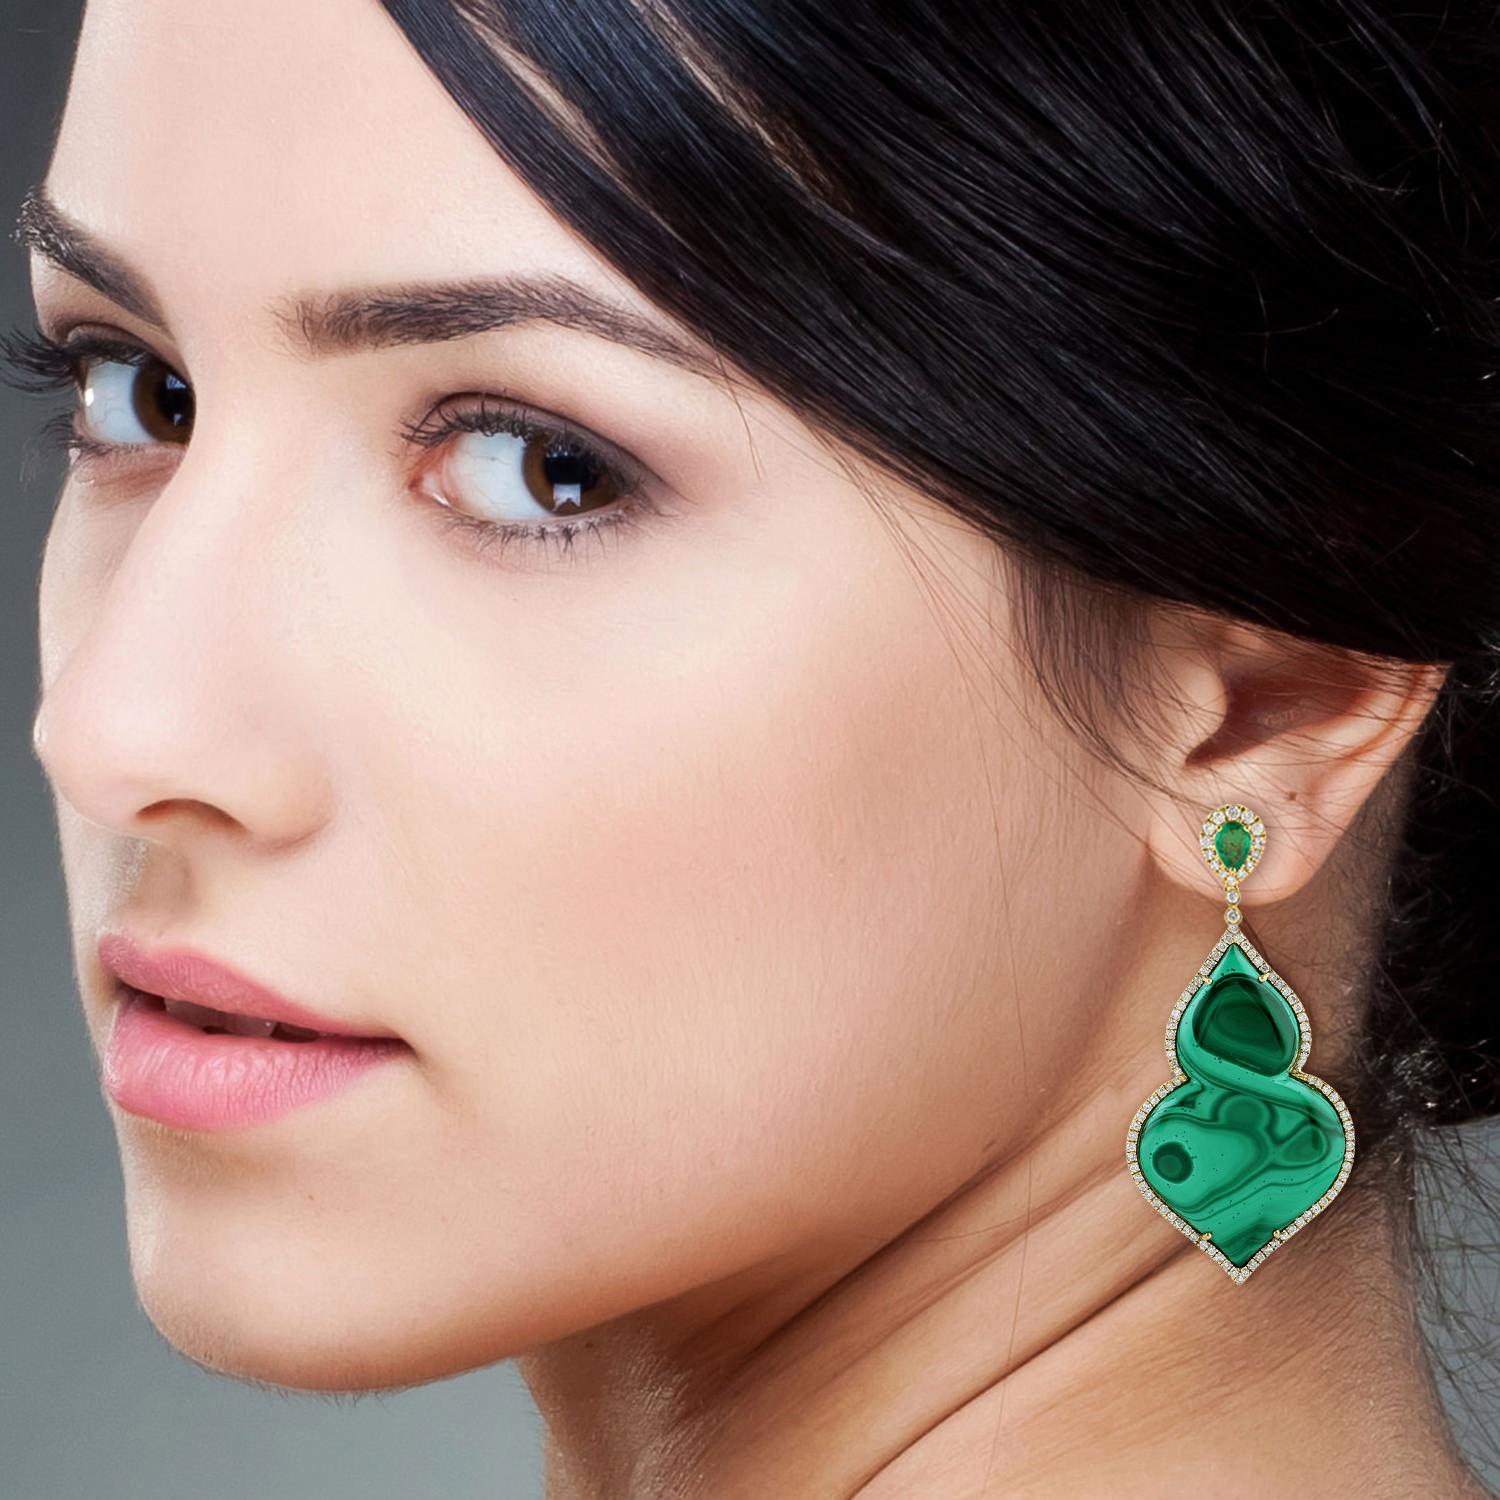 Handcrafted from 18-karat gold, these beautiful earrings are set with 51.16 carats Malachite, 1.1 carats Emerald and 1.99 carats of glimmering diamonds.

FOLLOW  MEGHNA JEWELS storefront to view the latest collection & exclusive pieces.  Meghna